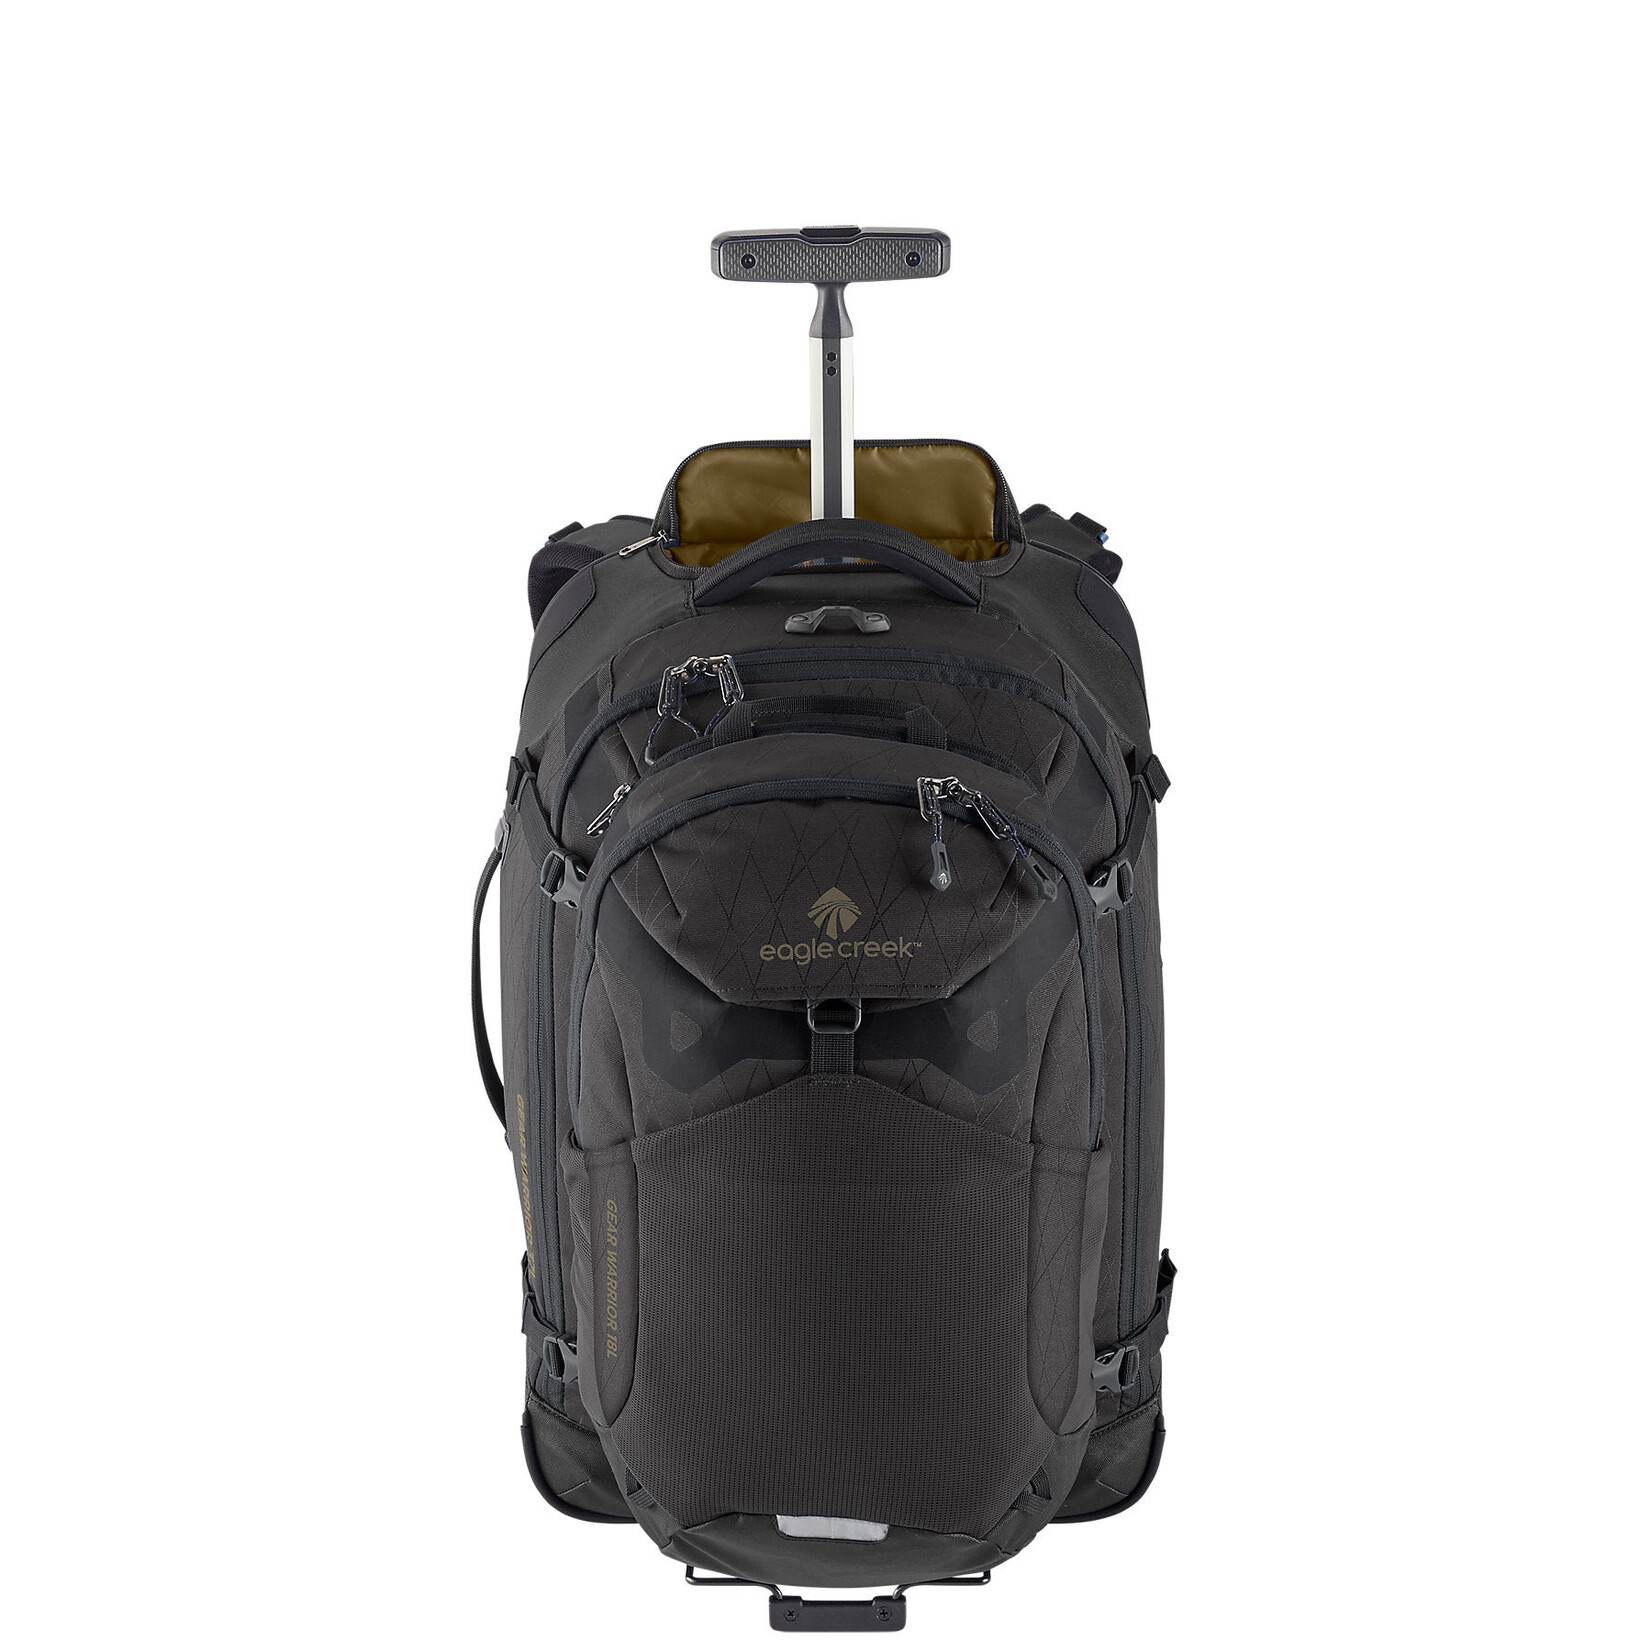 EAGLE CREEK GEAR WARRIOR CONVERTIBLE CARRY ON